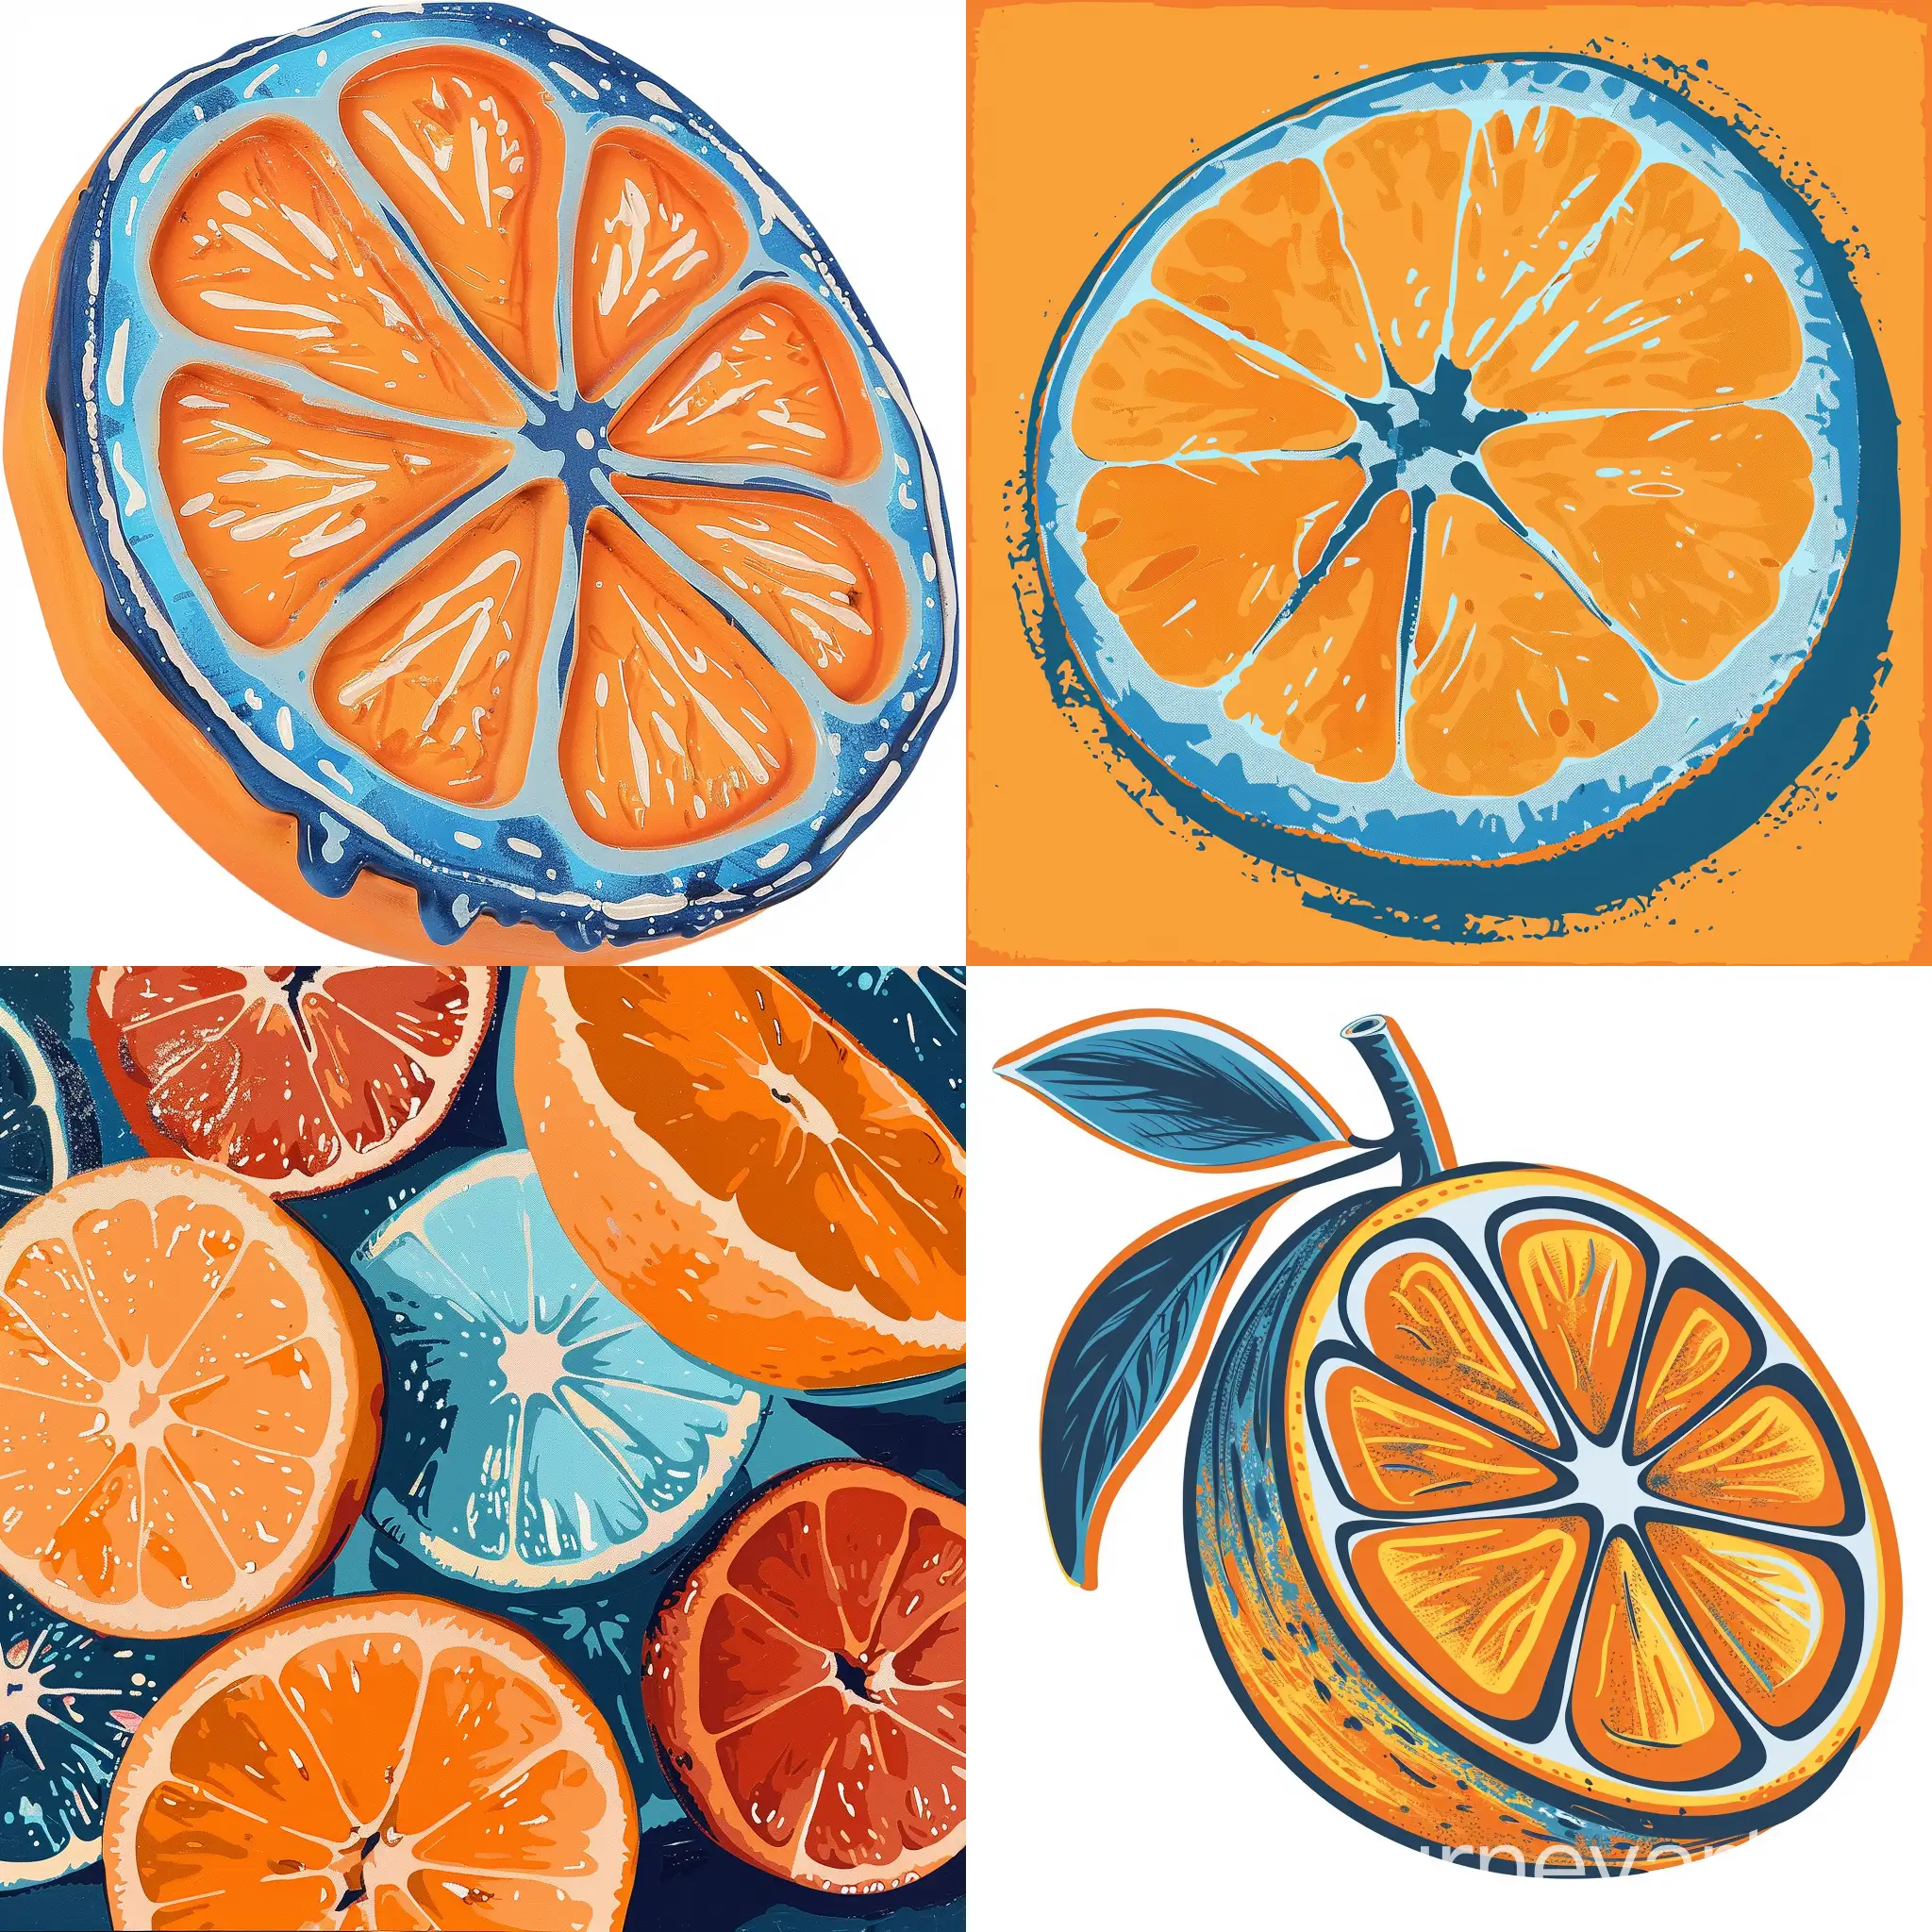 sneagel in orange and blue colors